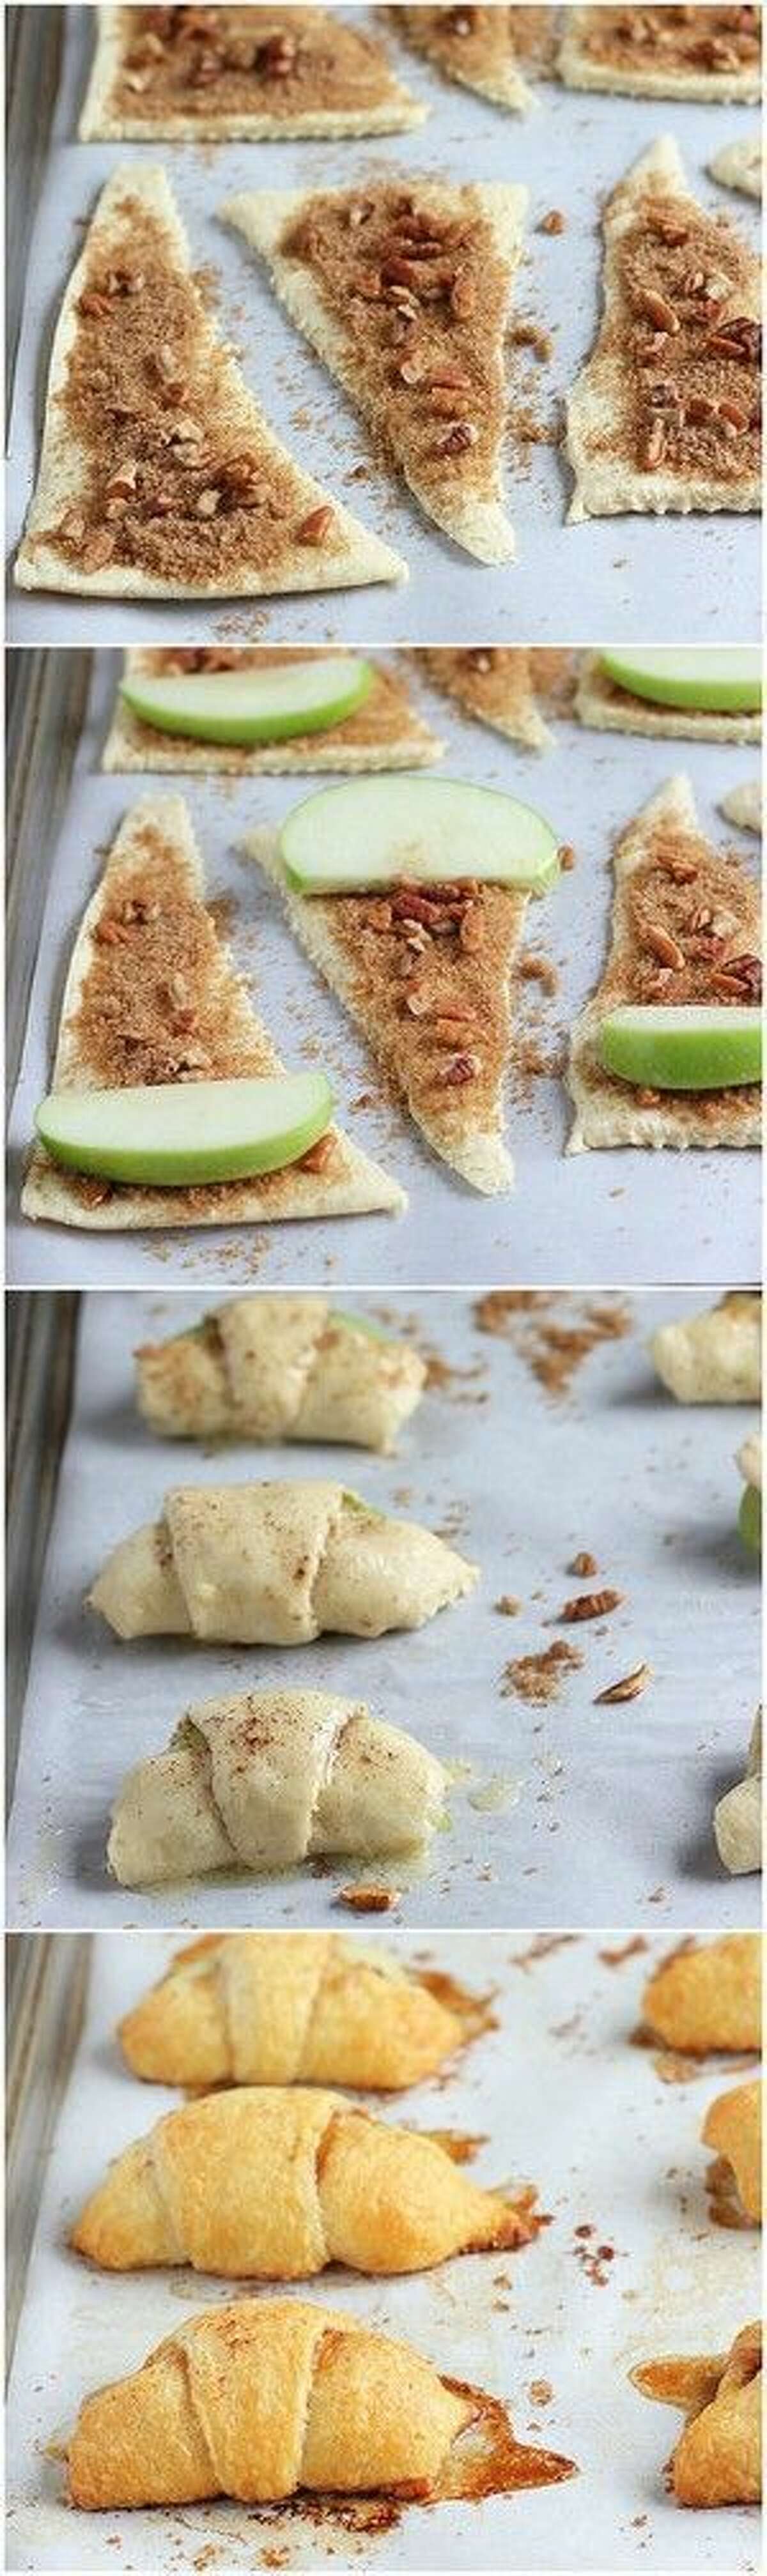 Apple pie bites:You'll want to make loads of these since they're delicious and easy to eat. Photo/recipe: Pinterest